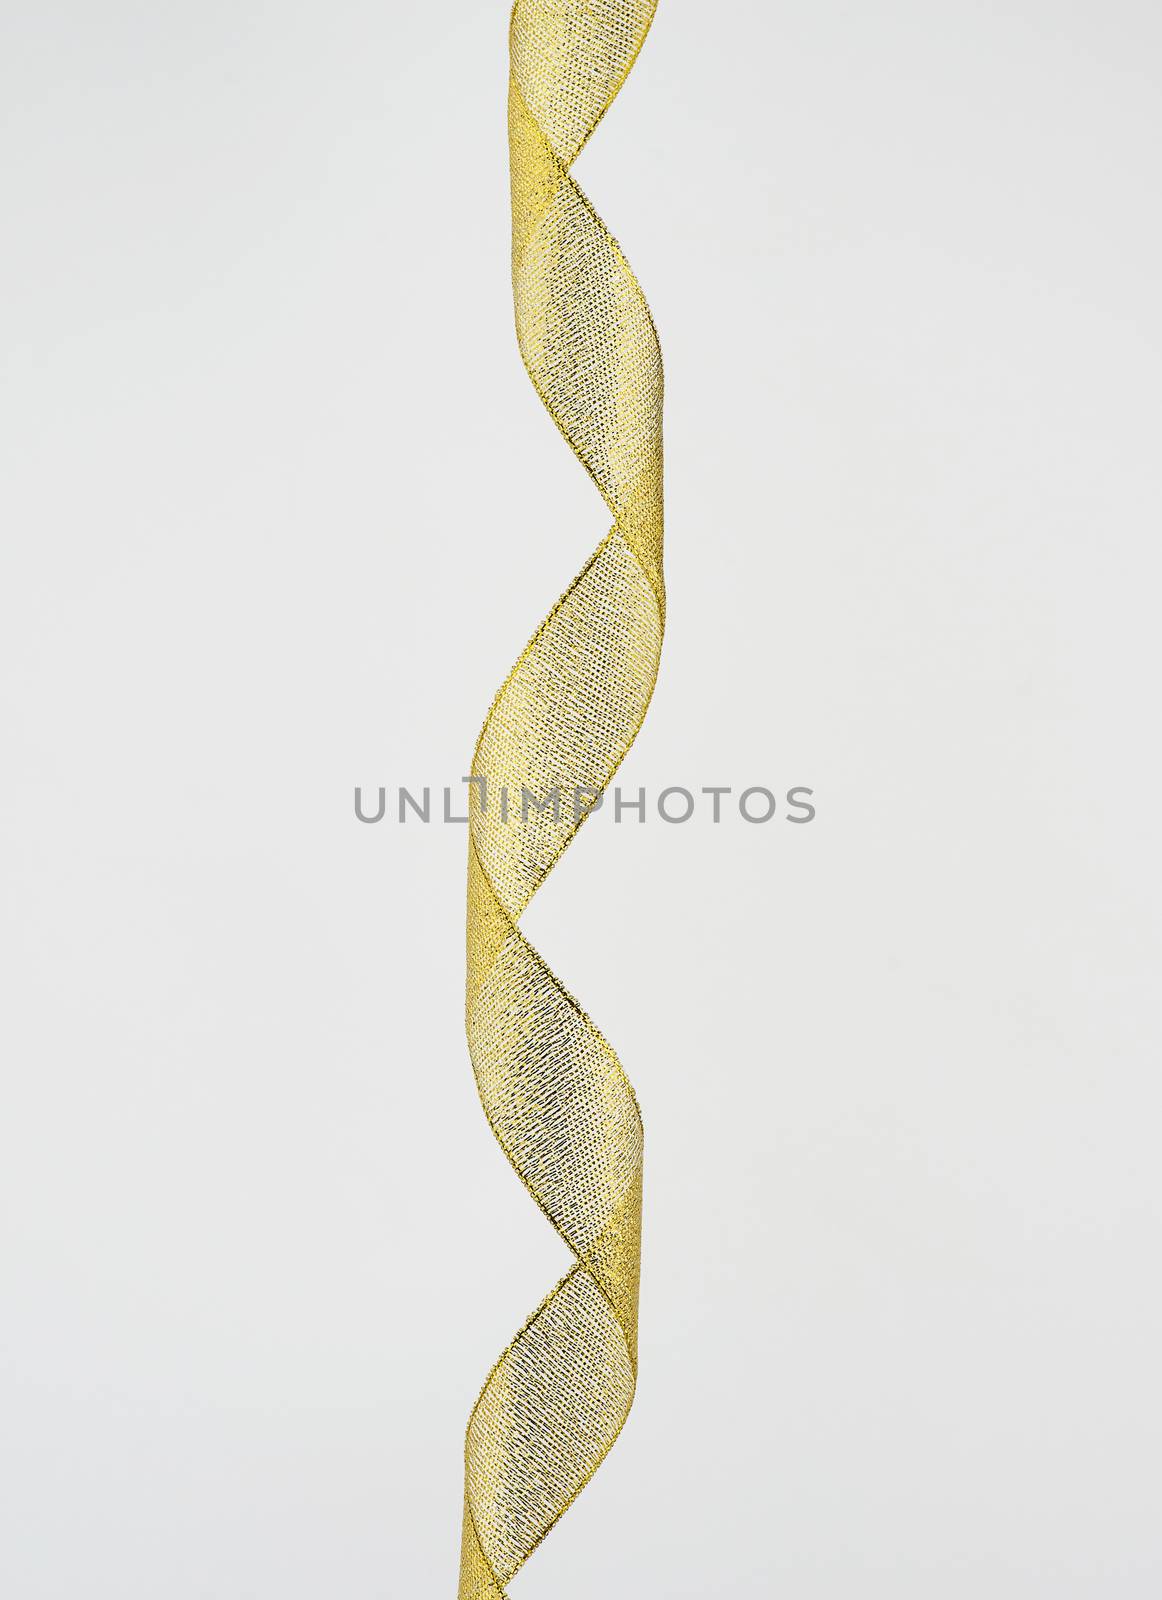 twisted golden silk decorative ribbon for packing gifts on a whi by ndanko